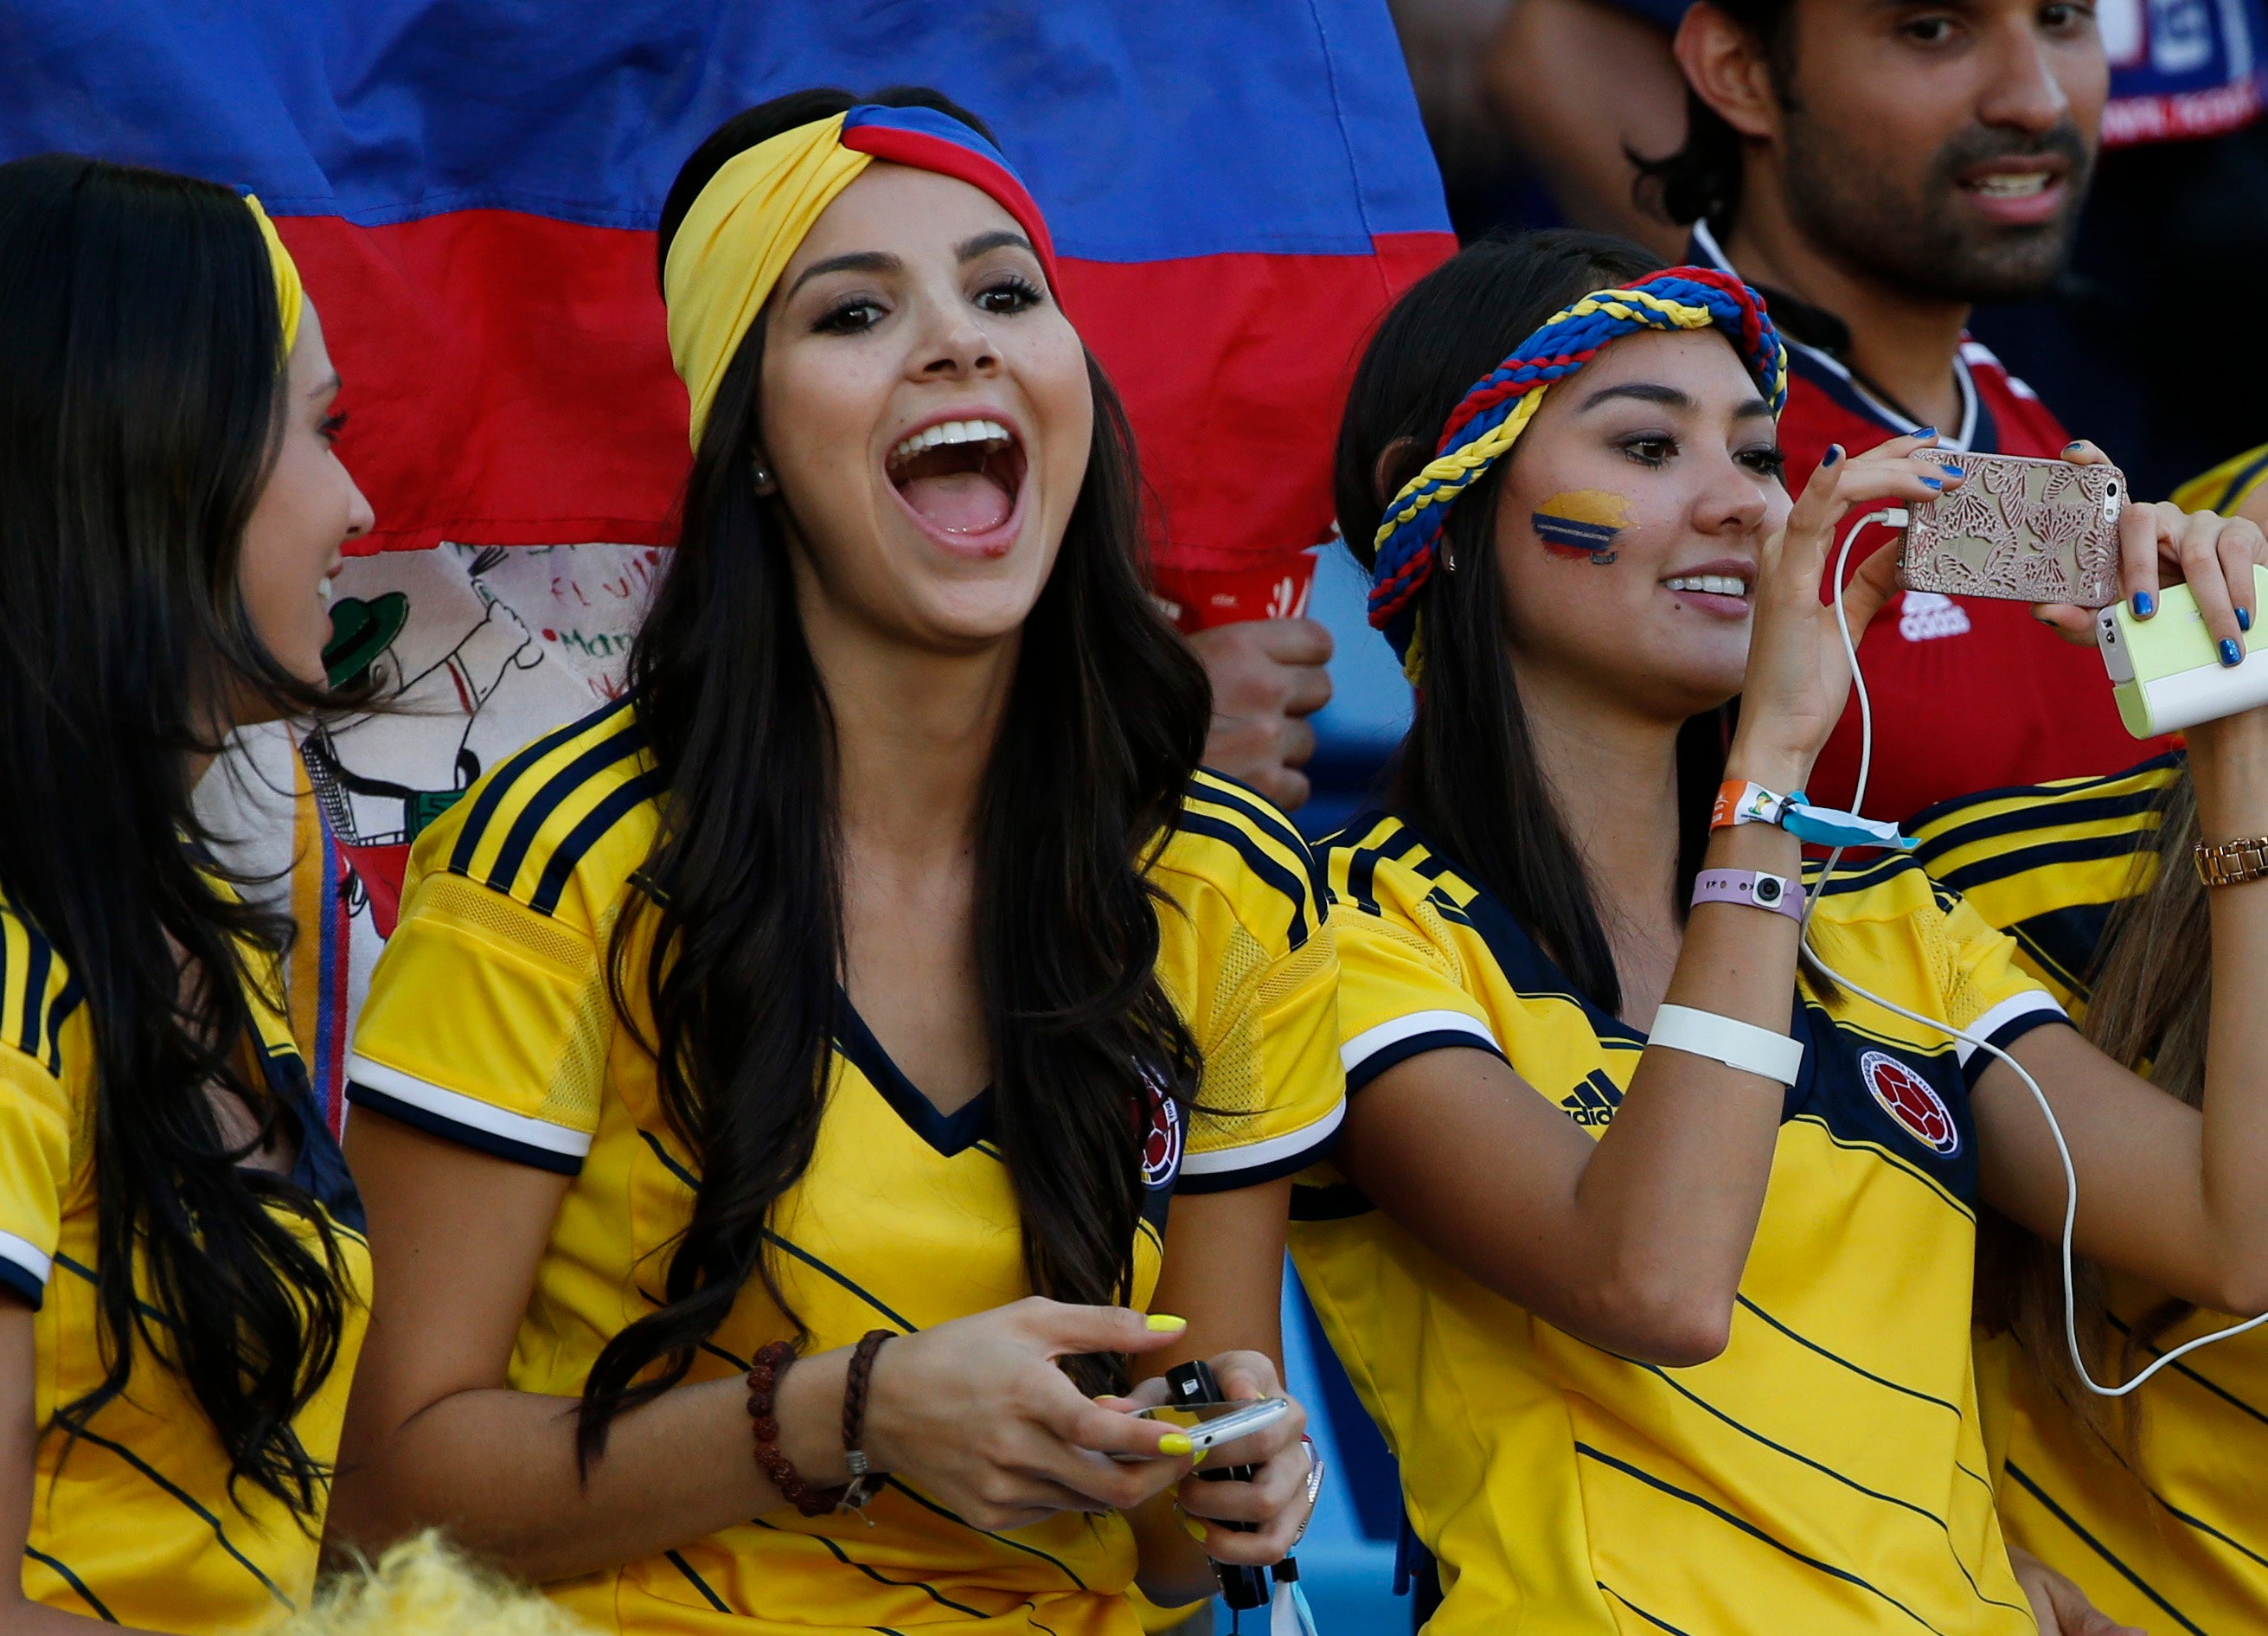 Colombia's fans cheer before the start of their 2014 World Cup Group C soccer match against Japan at the Pantanal arena in Cuiaba June 24, 2014.